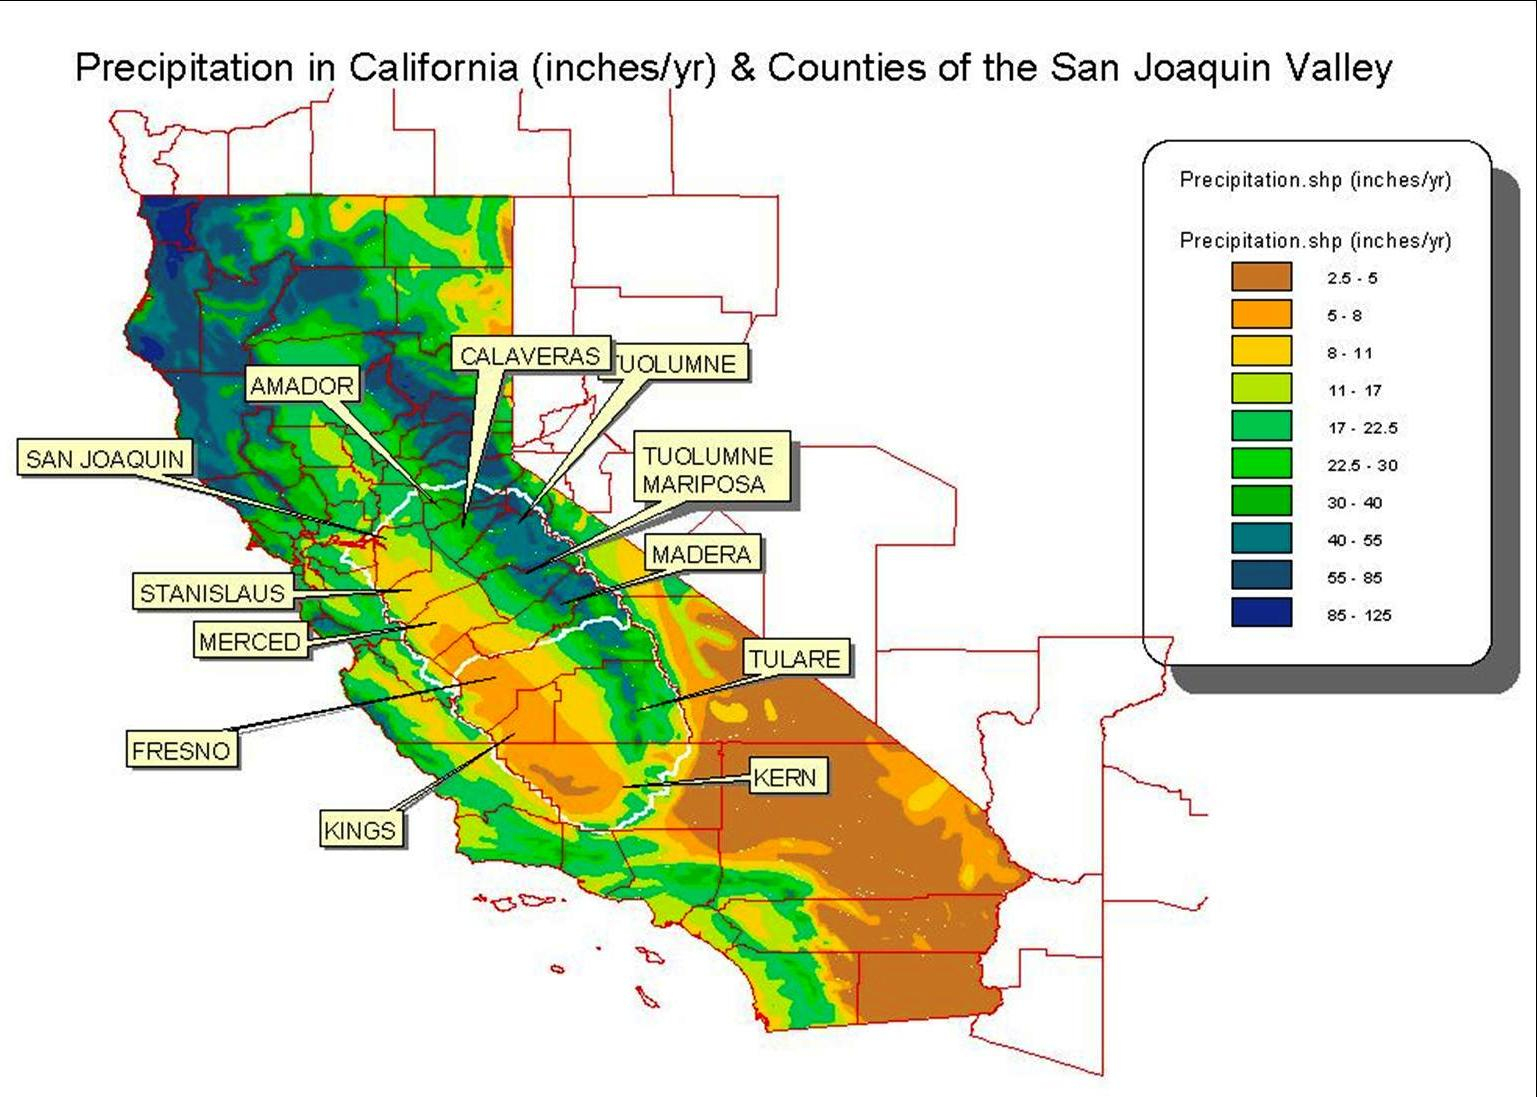 California Water Resources Map - Klipy - California Water Rights Map